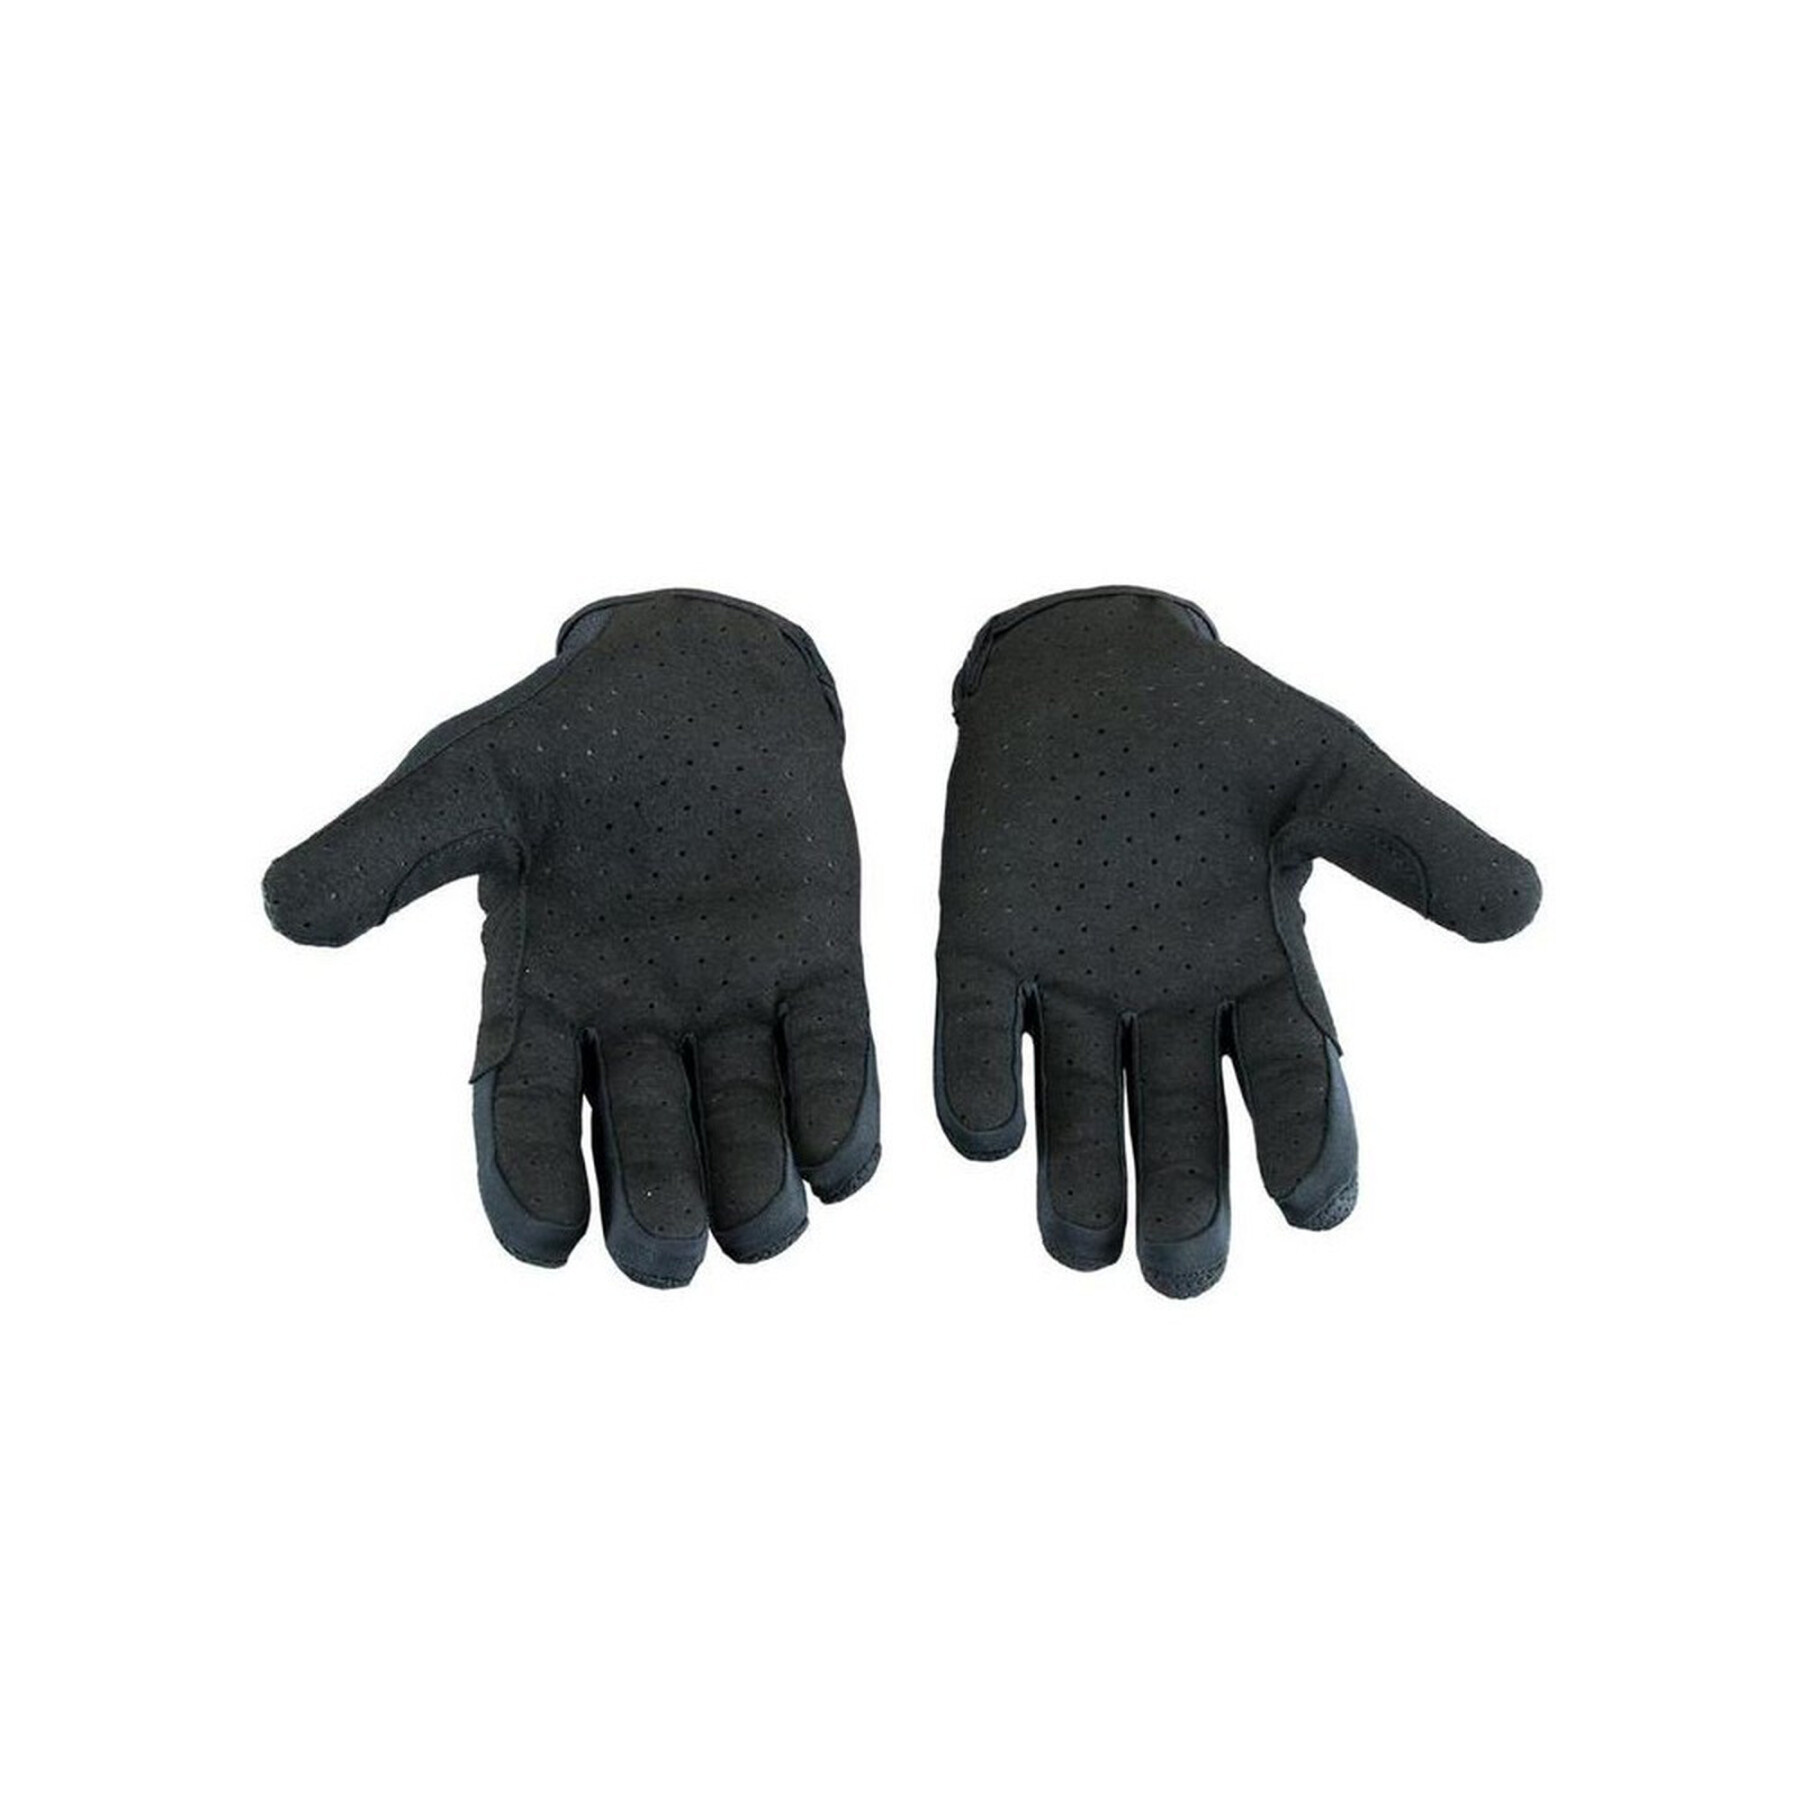 Children's cycling gloves Tall Order Barspin